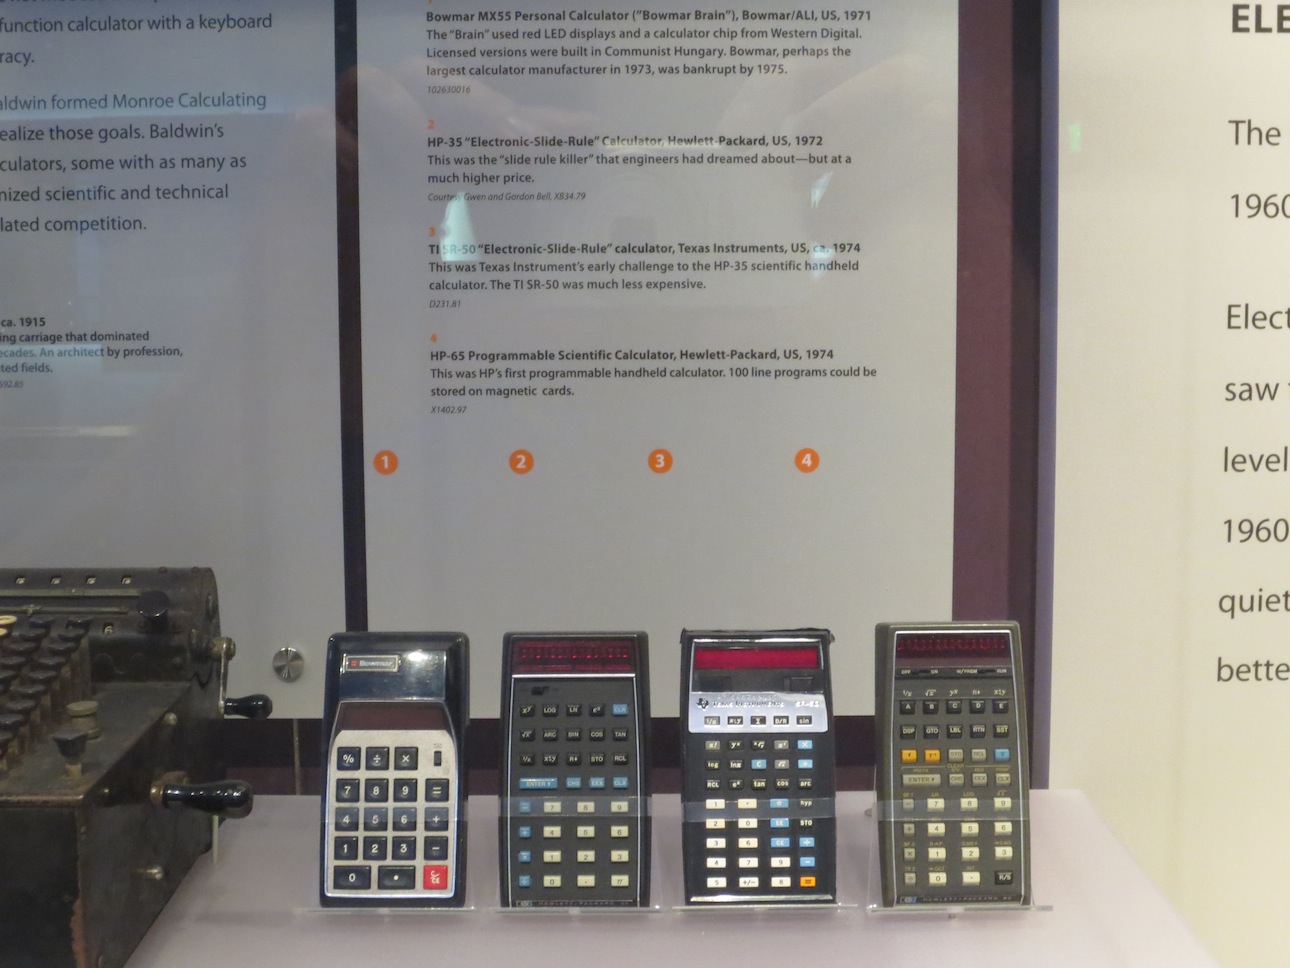 Handheld calculators from the 1970s.